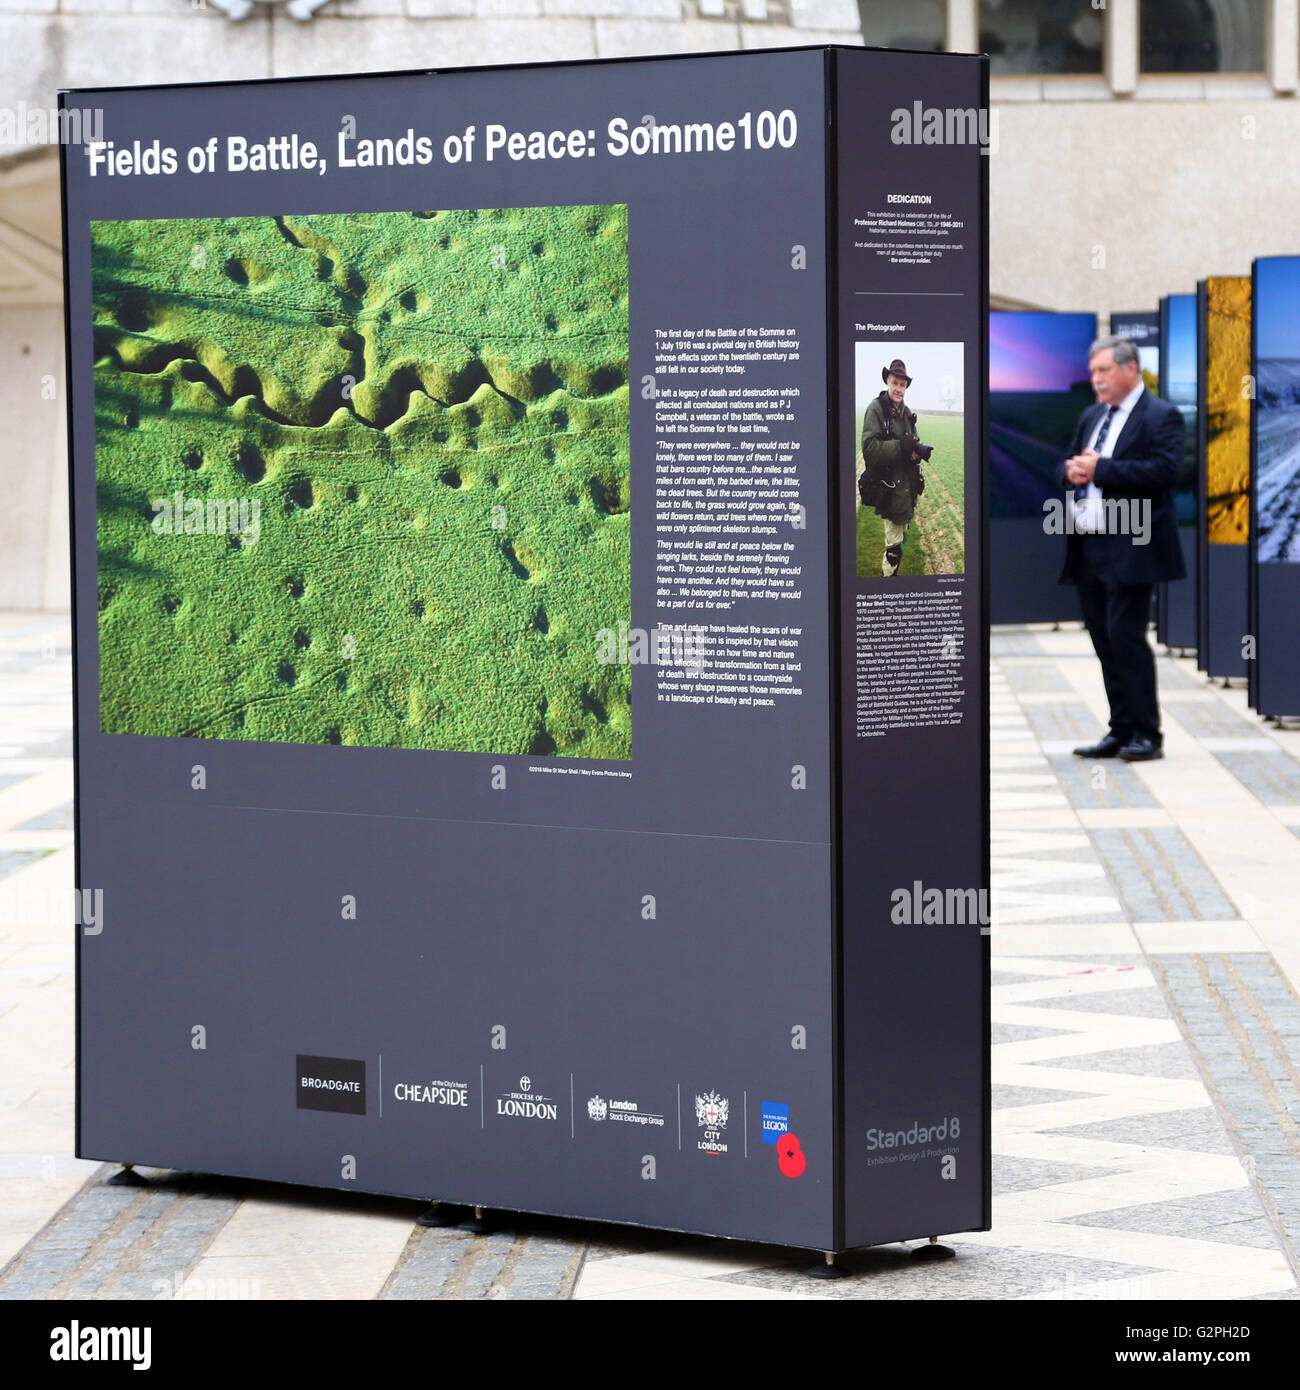 London, UK. 1st June 2016. Launch of the Fields of Battle, Lands of Peace Somme 100 outdoor exhibition by Michael St Maur Sheil, Guildhall Yard, London commemorating the centenary of the Battle of the Somme during World War One. The exhibition, sponsored by the Royal British Legion, records the battlefields of the Somme as they are today showing how peace has changed the landscape which was witness to one of the bloodiest battes in history. Credit:  Paul Brown/Alamy Live News Stock Photo